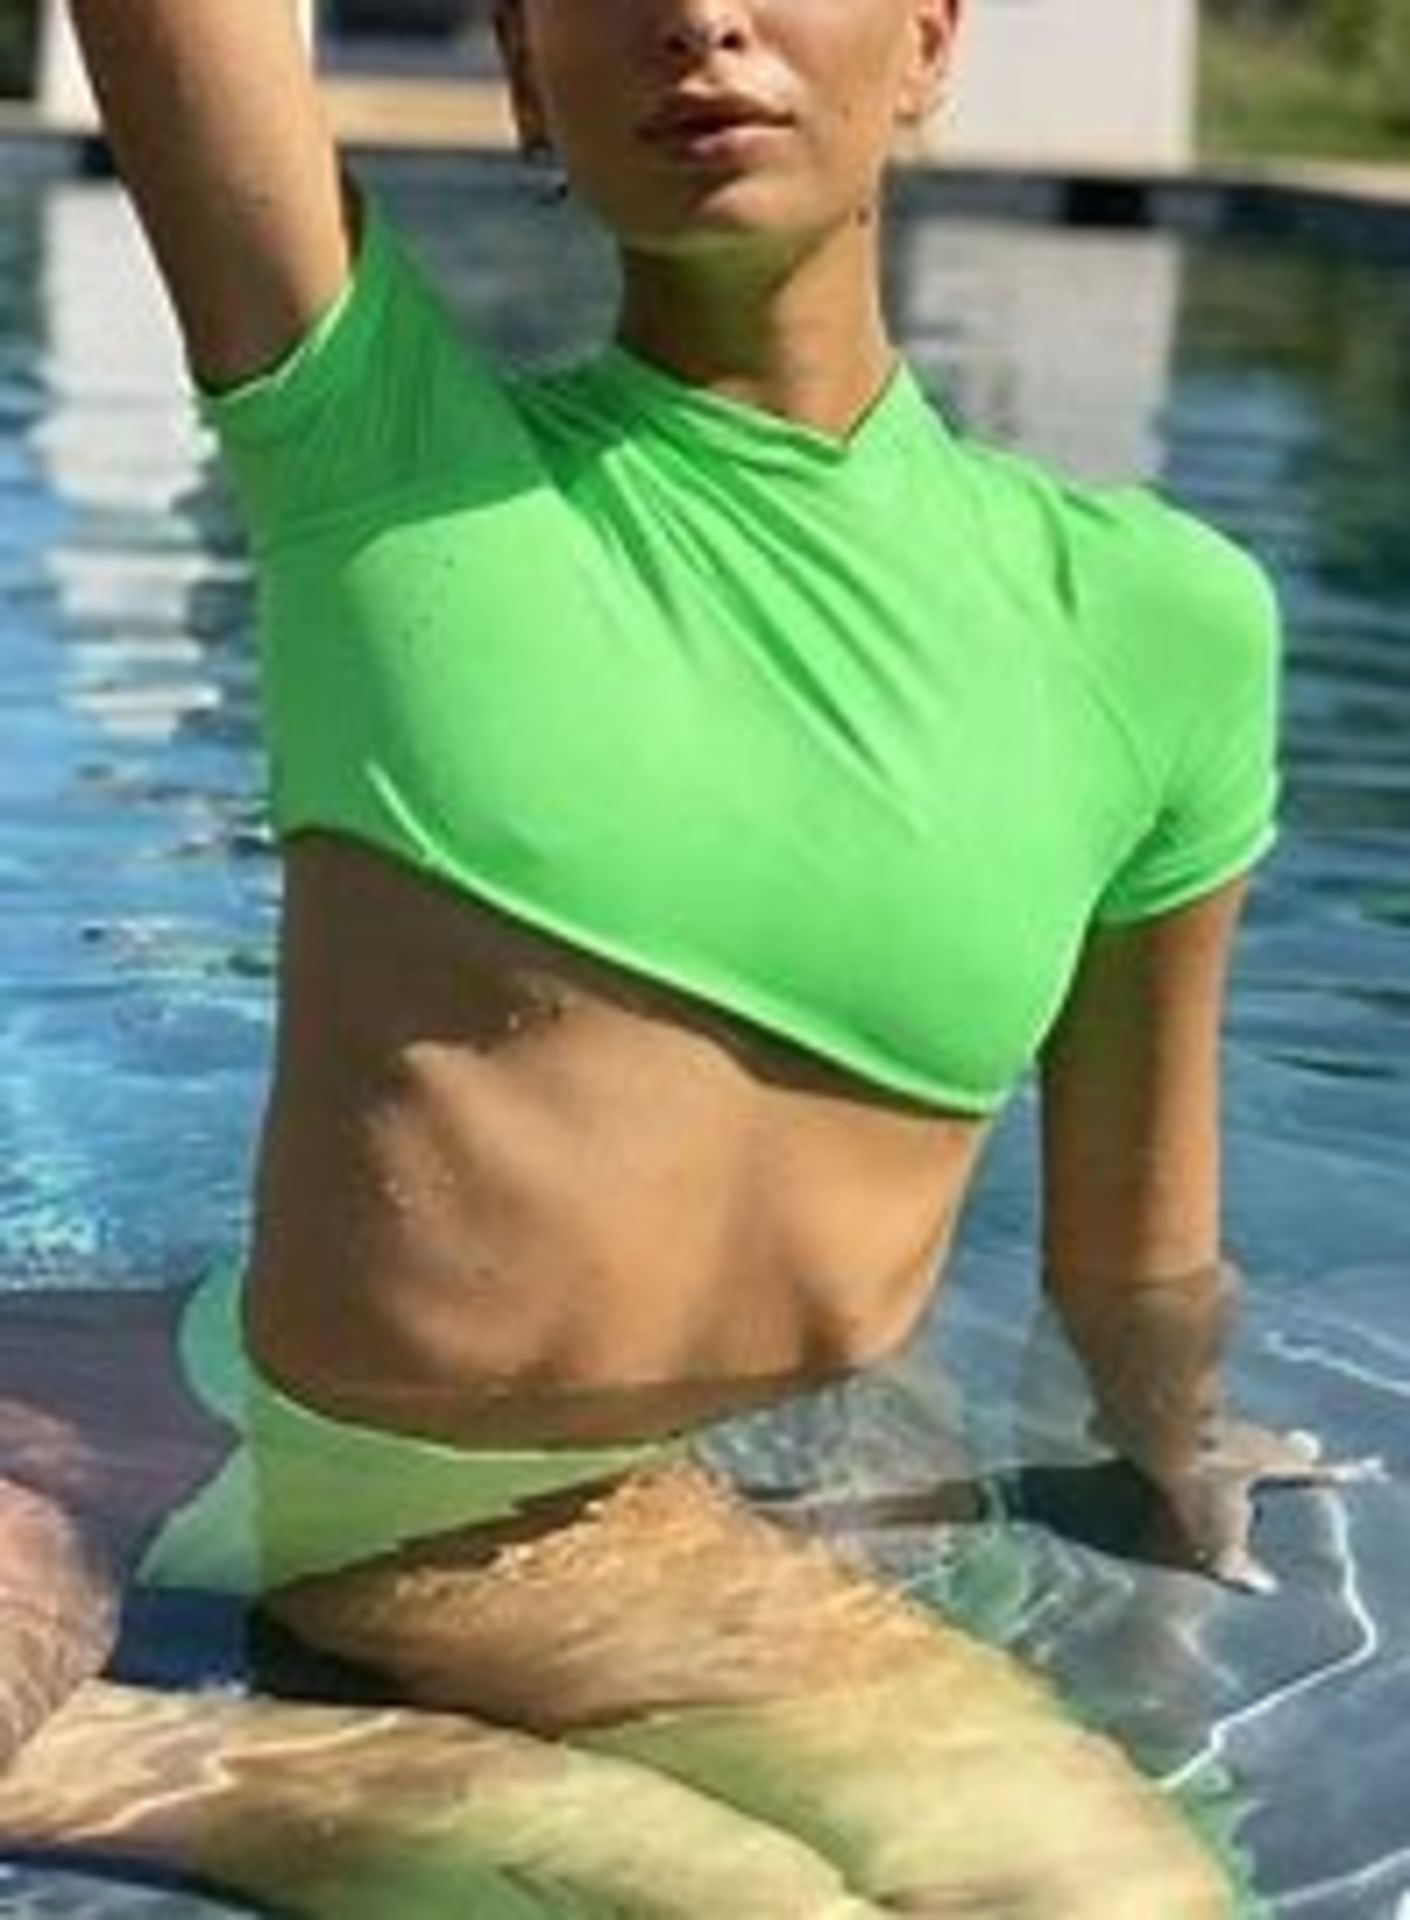 10 X BRAND NEW HUGZ IBIZA T SHIRT BIKINIS IN NEON GREEN - SIZE M - IN INDIVIDUAL BAGS WITH TAGS - - Image 2 of 2